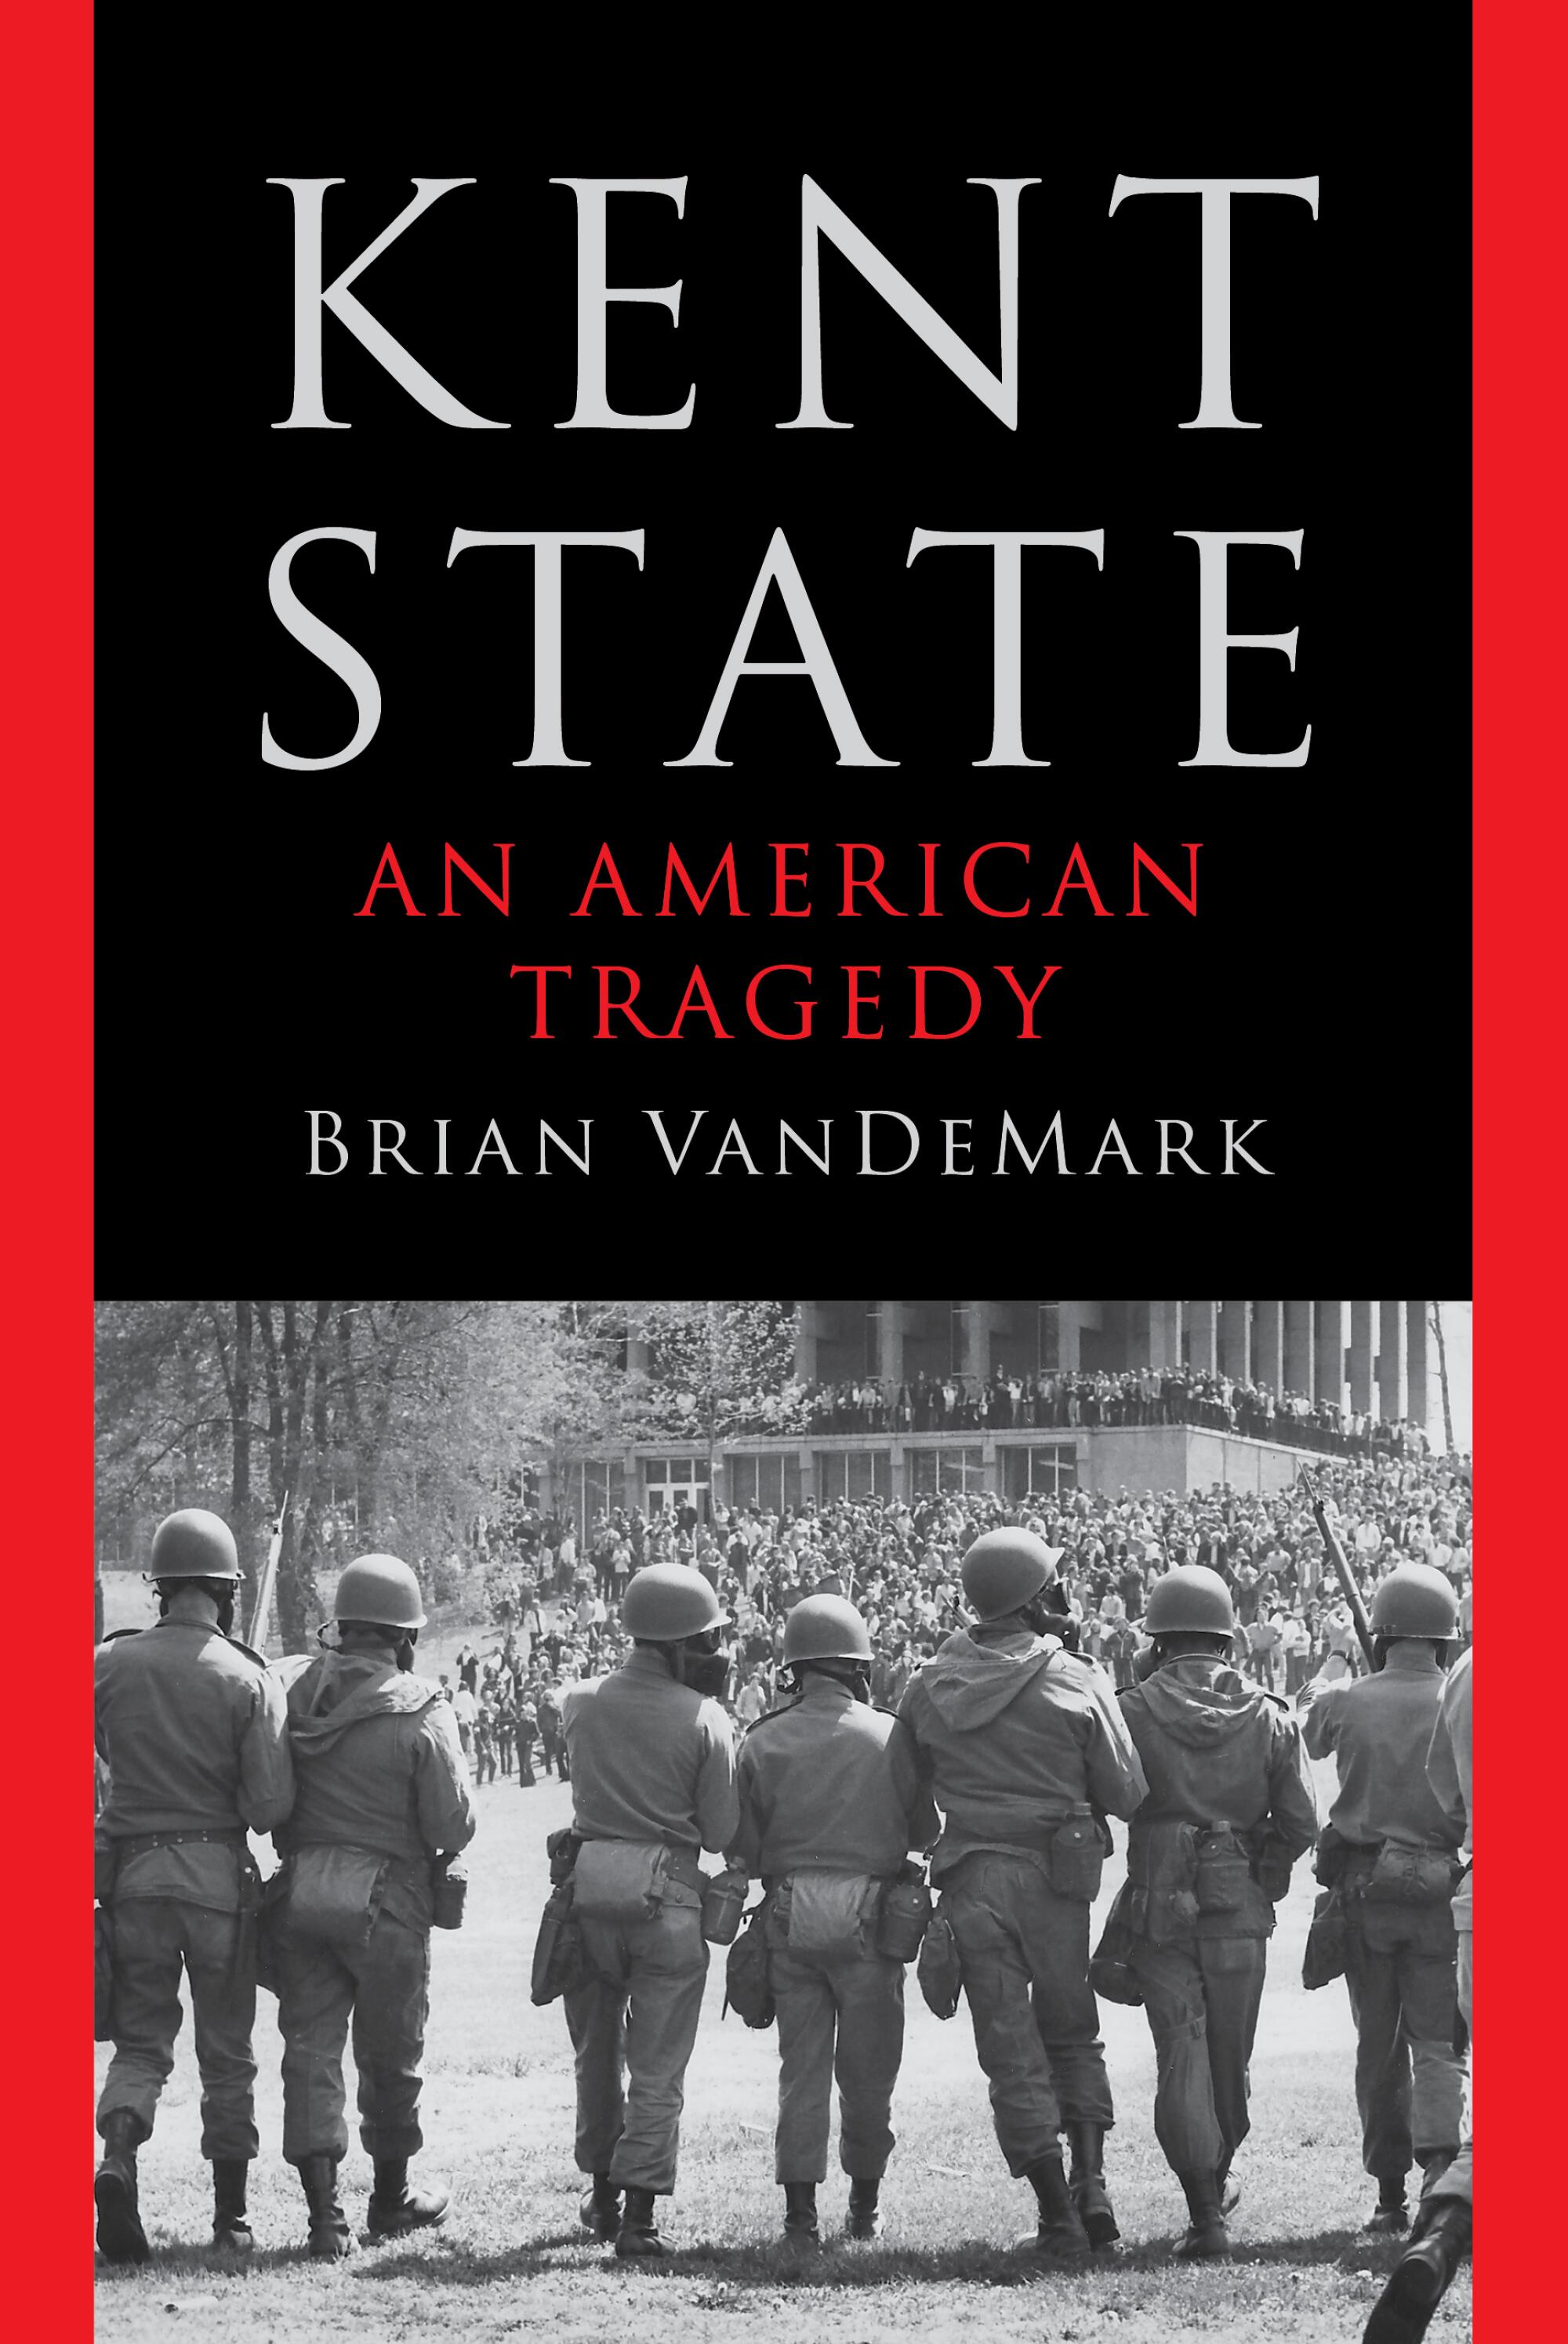 "Kent State: An American Tragedy" book cover